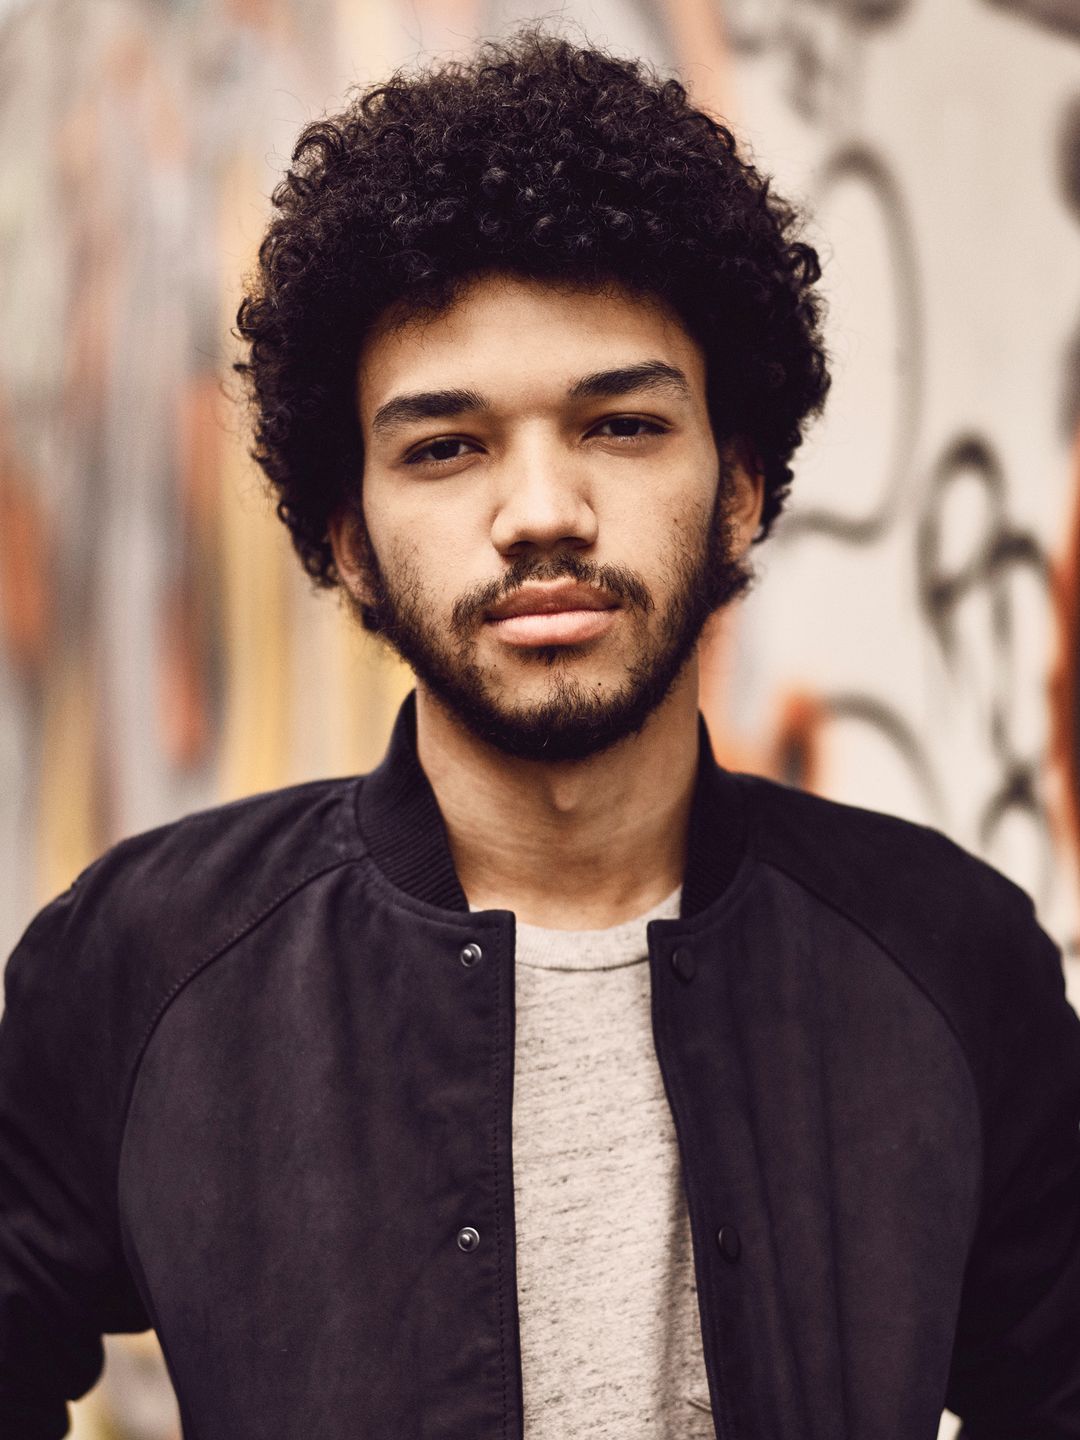 Justice Smith how did he became famous